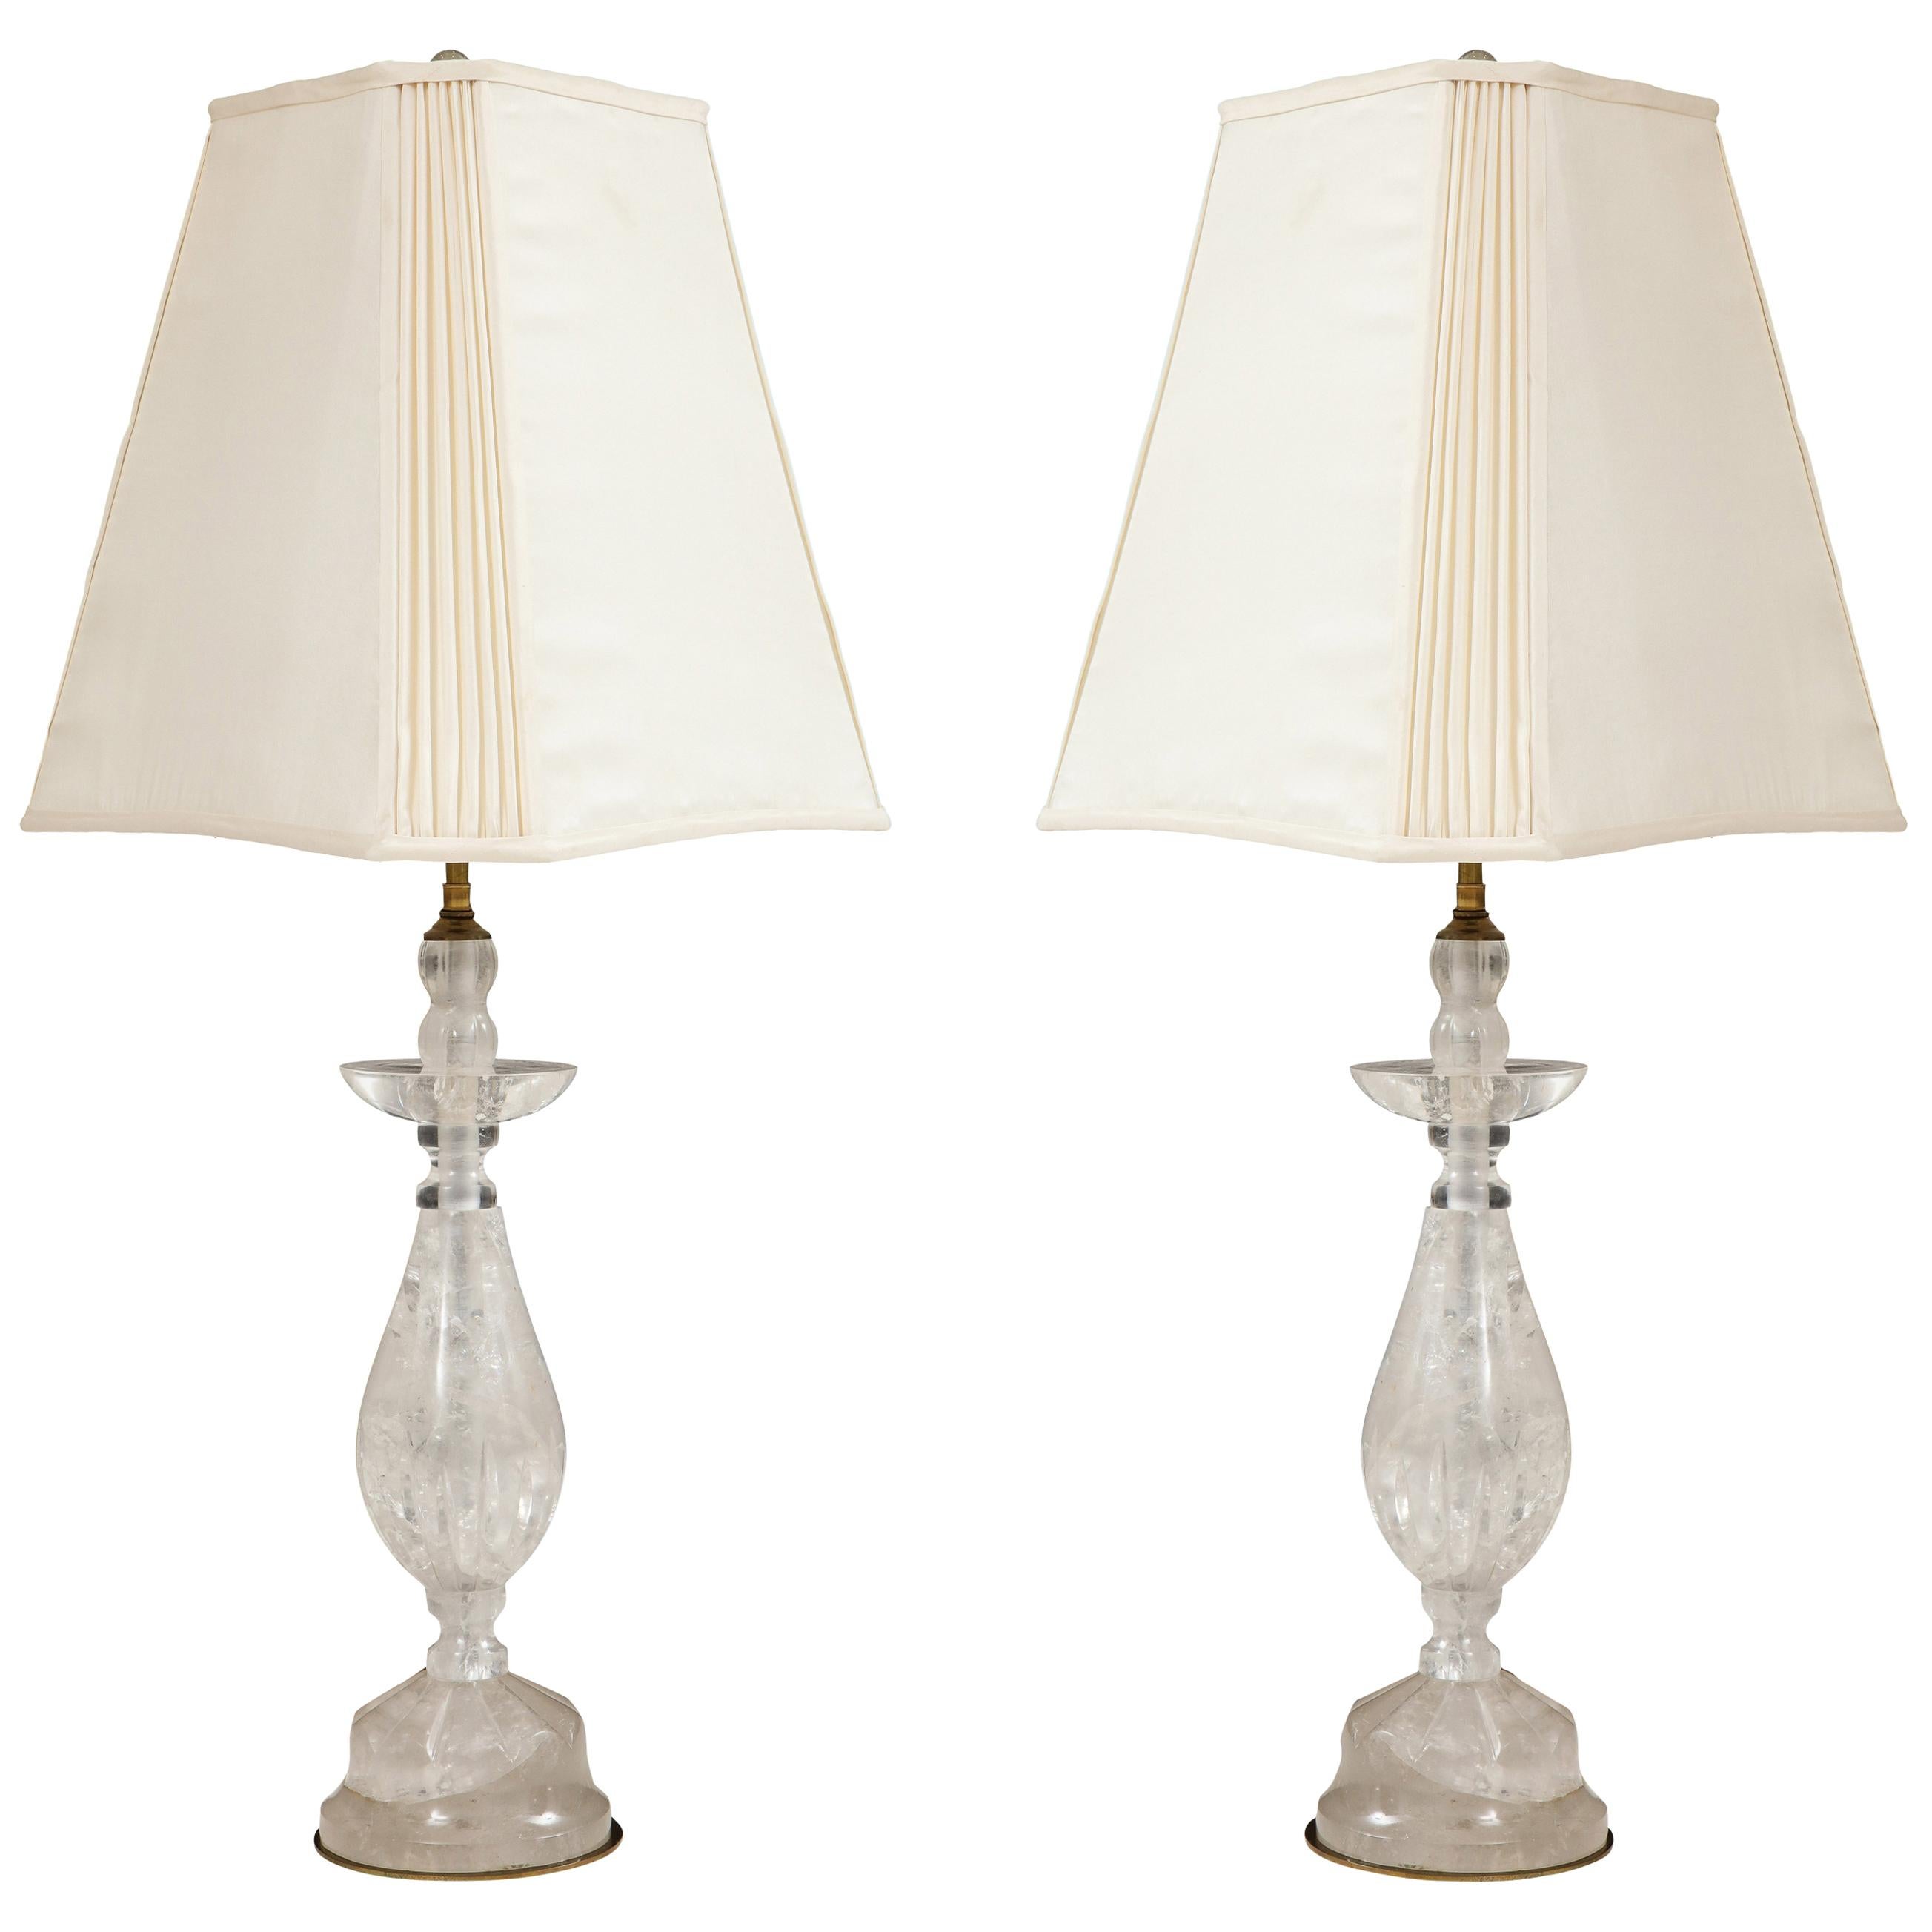 Pair of Baluster Form Rock Crystal Lamps